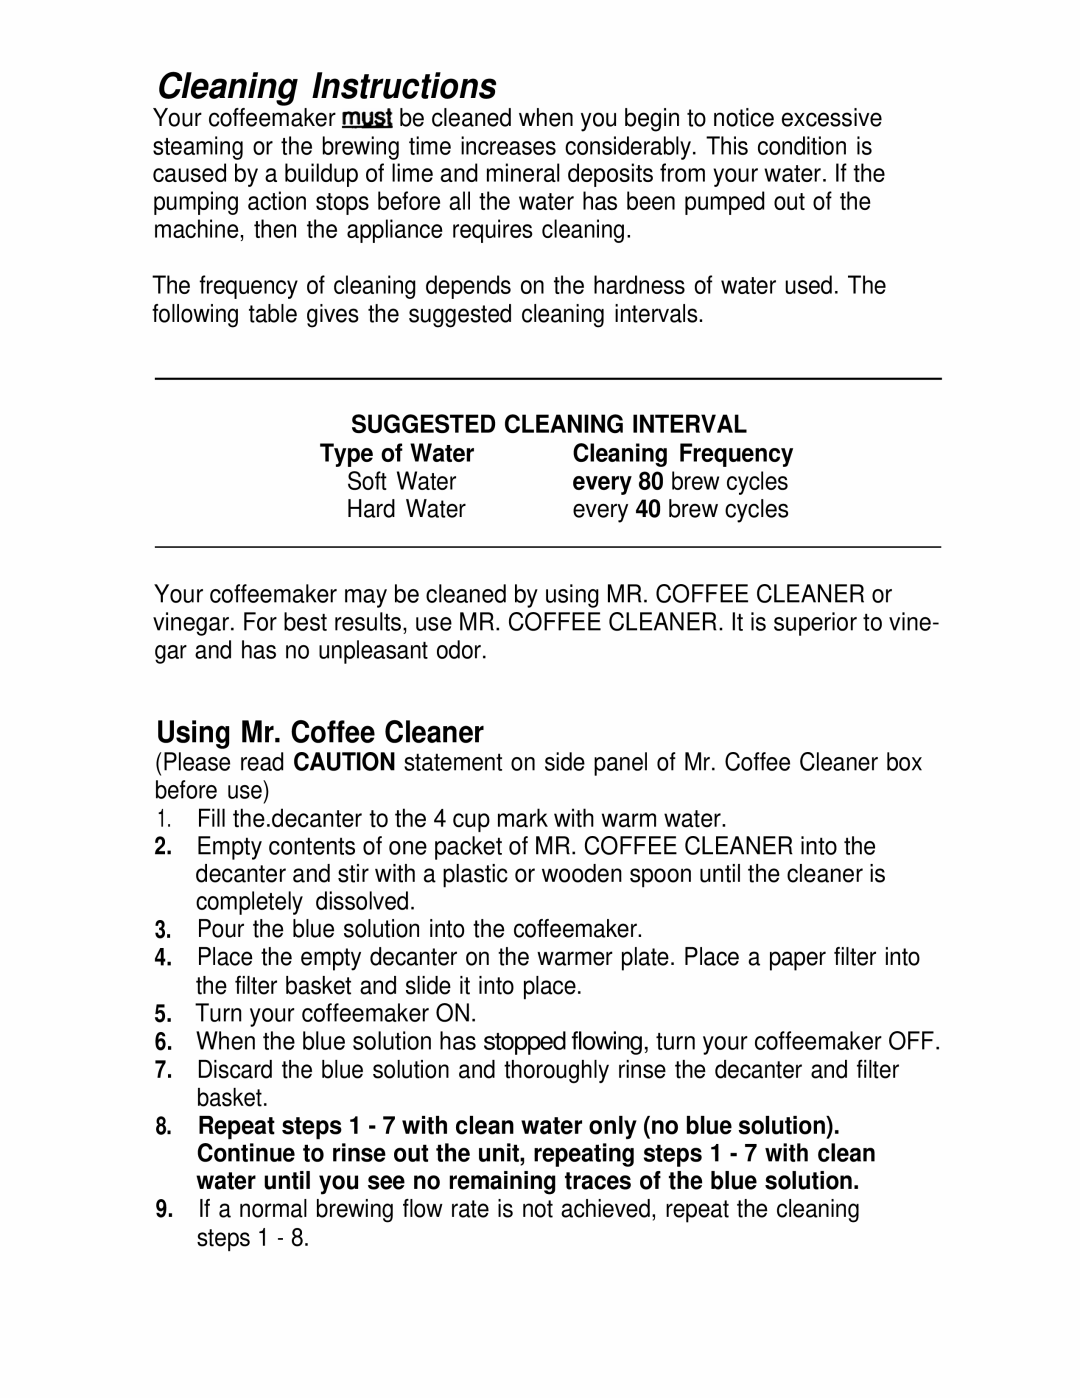 Mr. Coffee BL5, BL6, BL4 manual Cleaning Instructions, Using Mr. Coffee Cleaner 